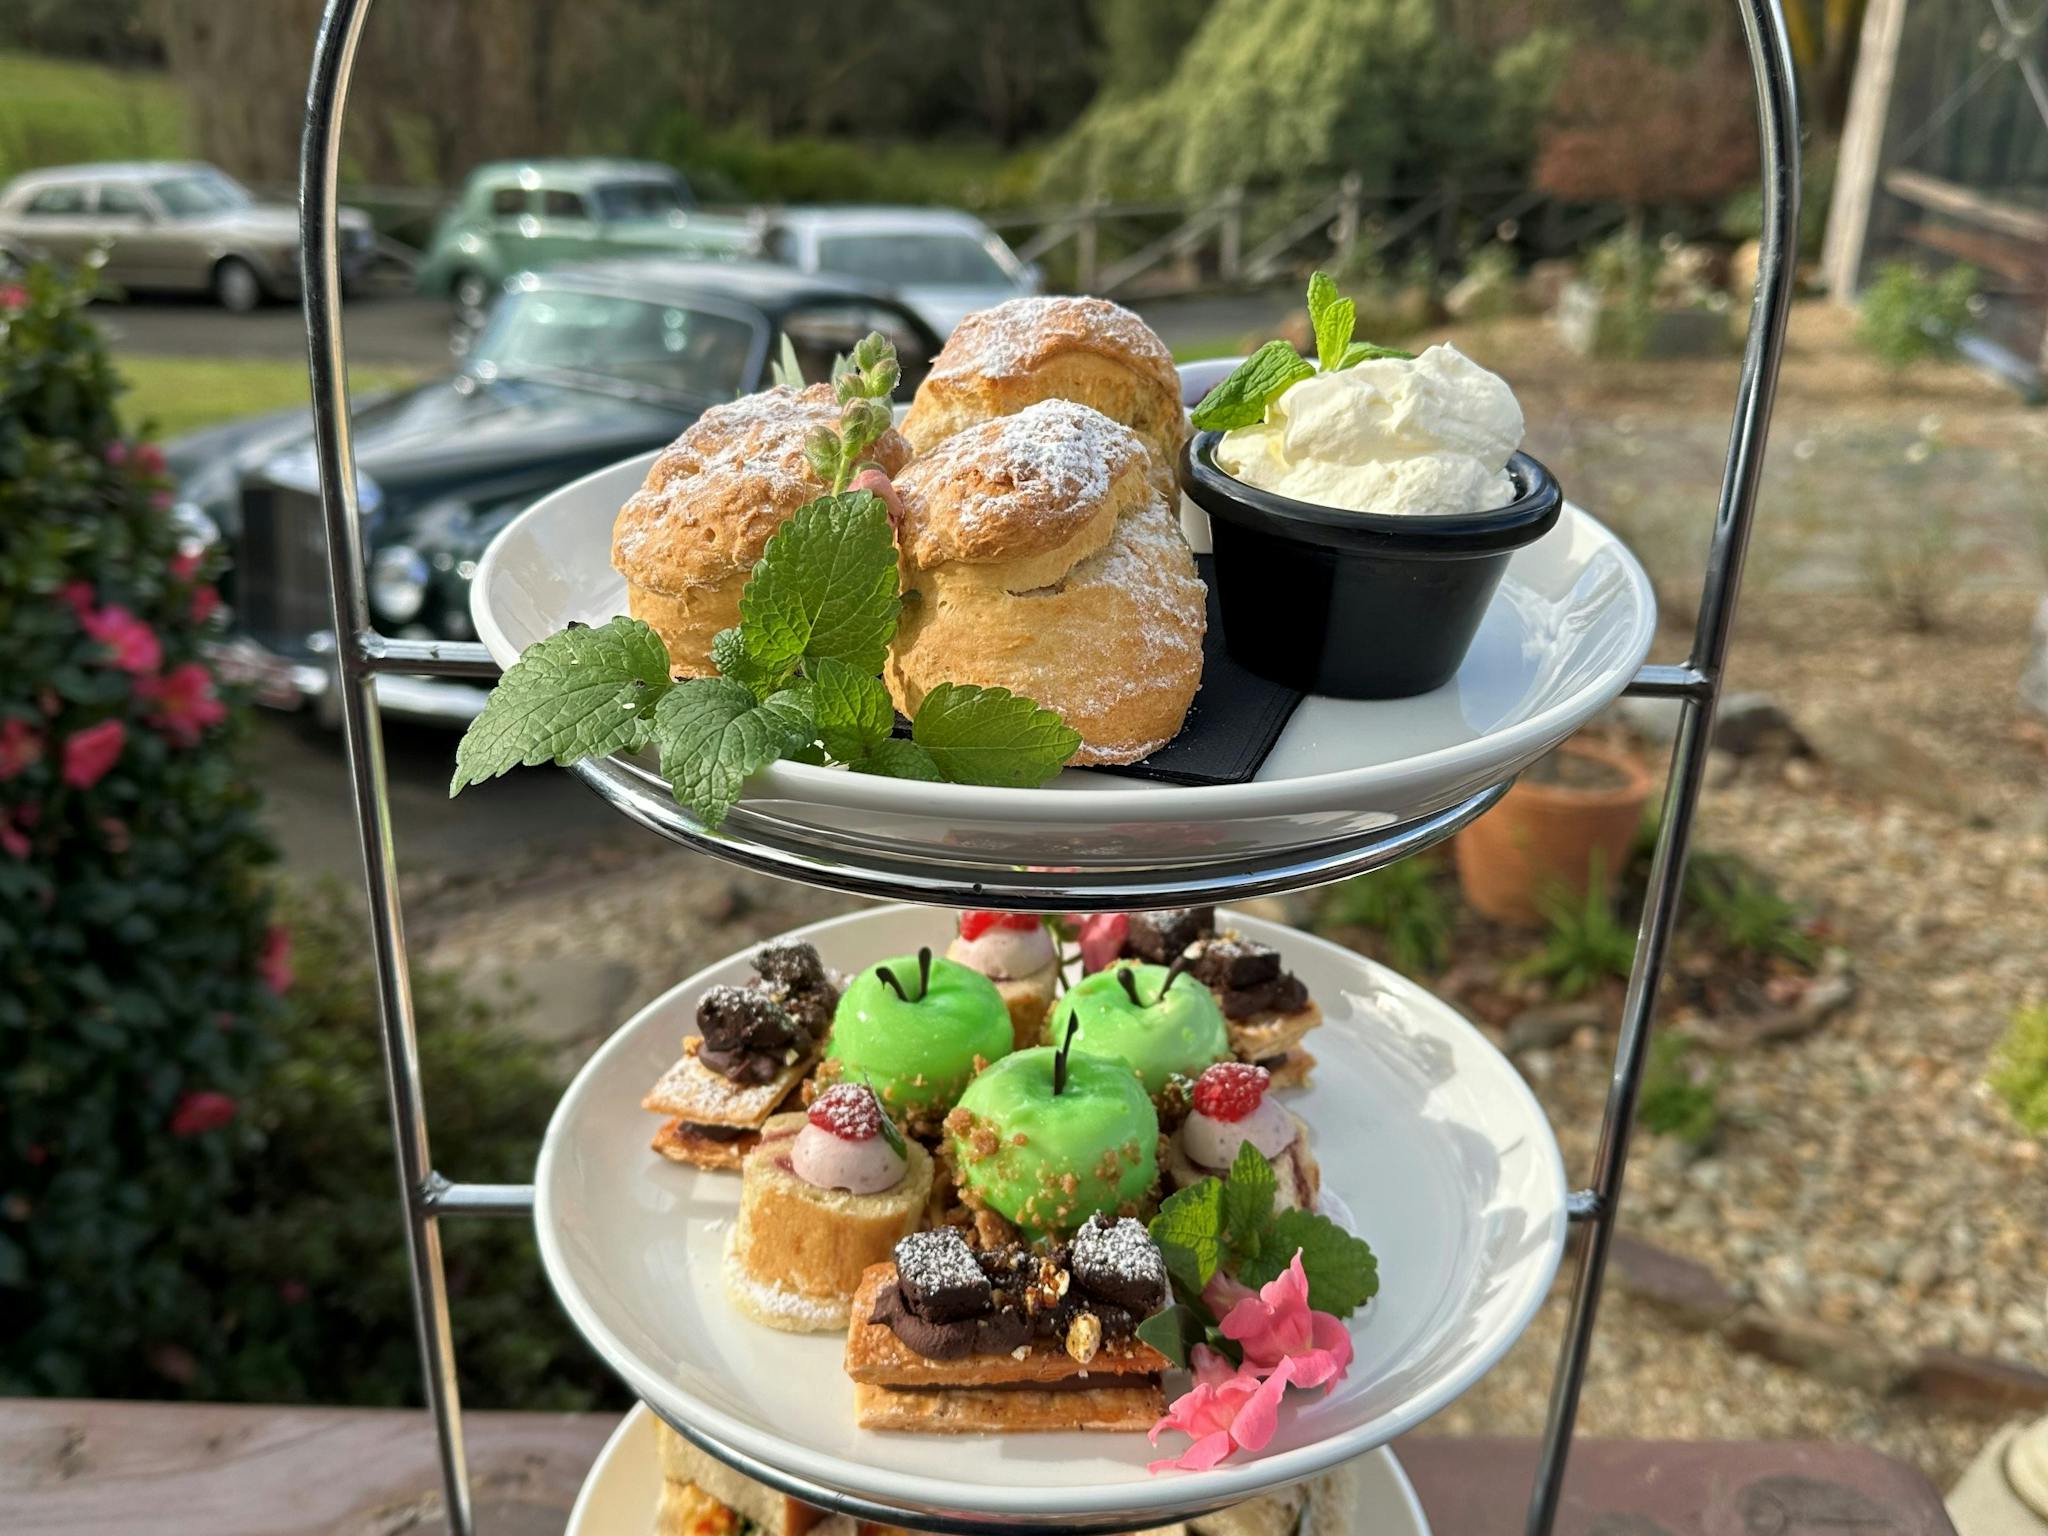 A three tiered stand of high tea sweet and savoury pastries, scones jam and cream.